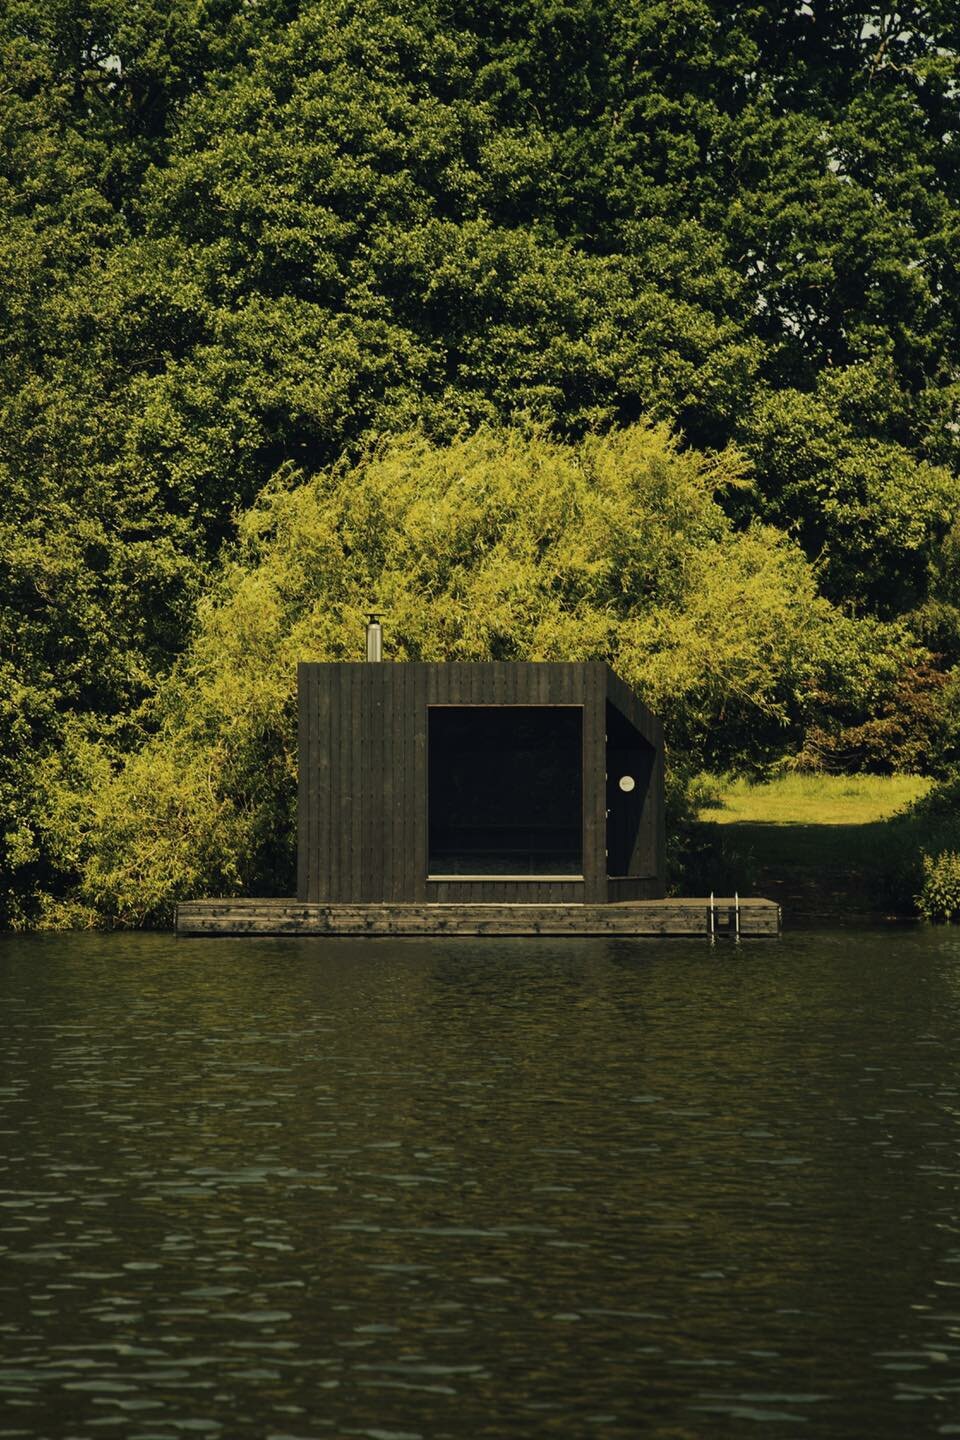 koto designs sustainable cabin retreat with floating sauna for fritton lake in england